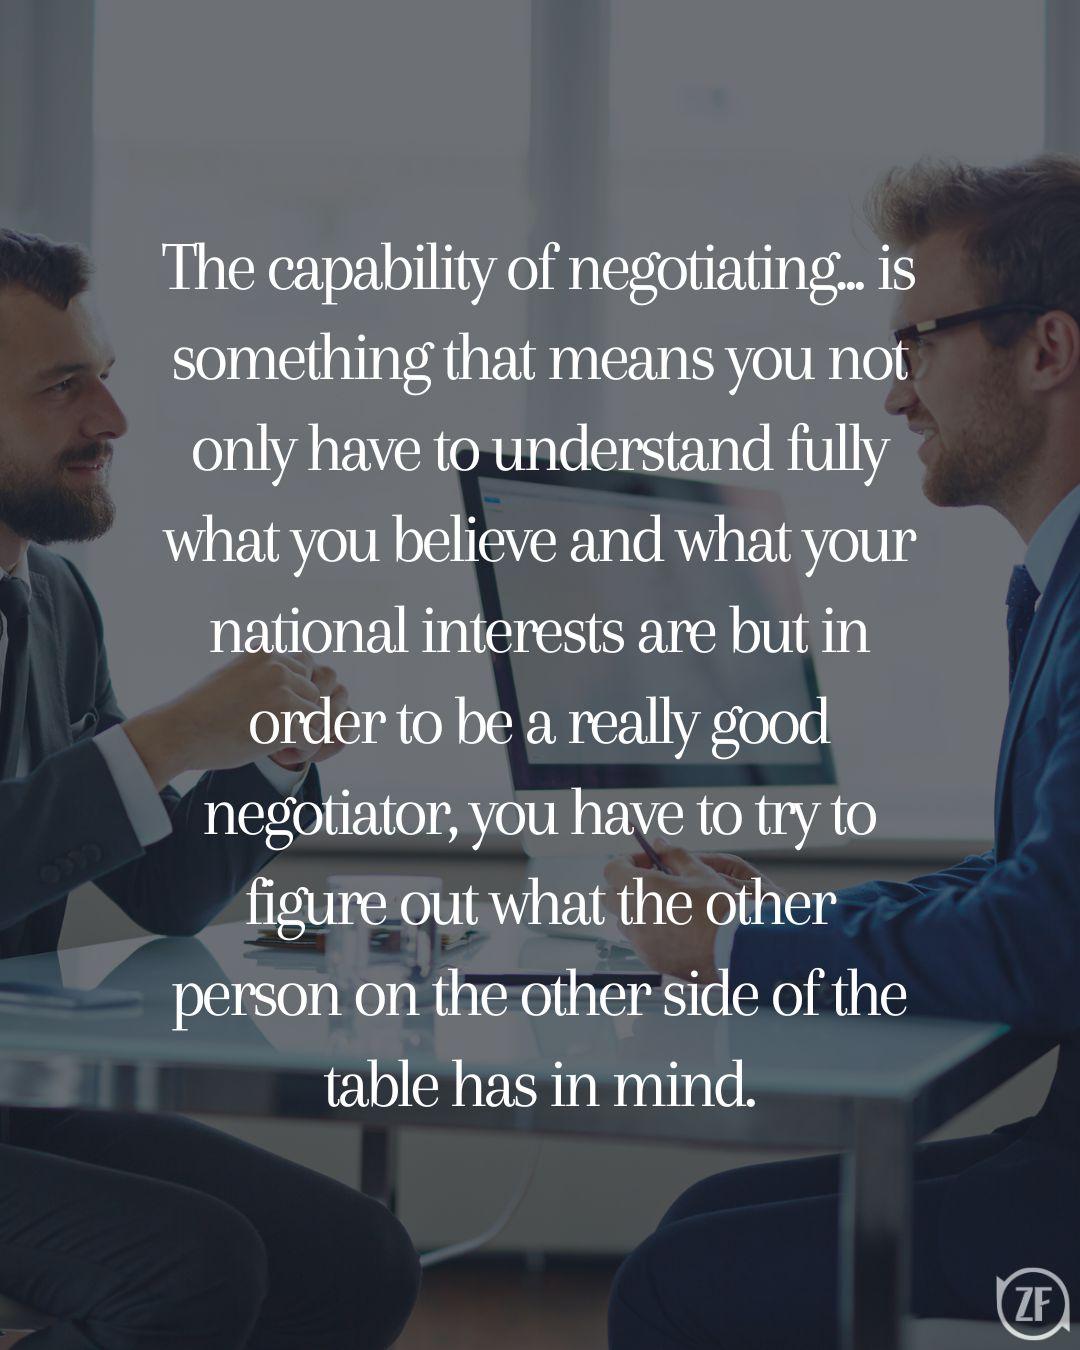 The capability of negotiating... is something that means you not only have to understand fully what you believe and what your national interests are but in order to be a really good negotiator, you have to try to figure out what the other person on the other side of the table has in mind.